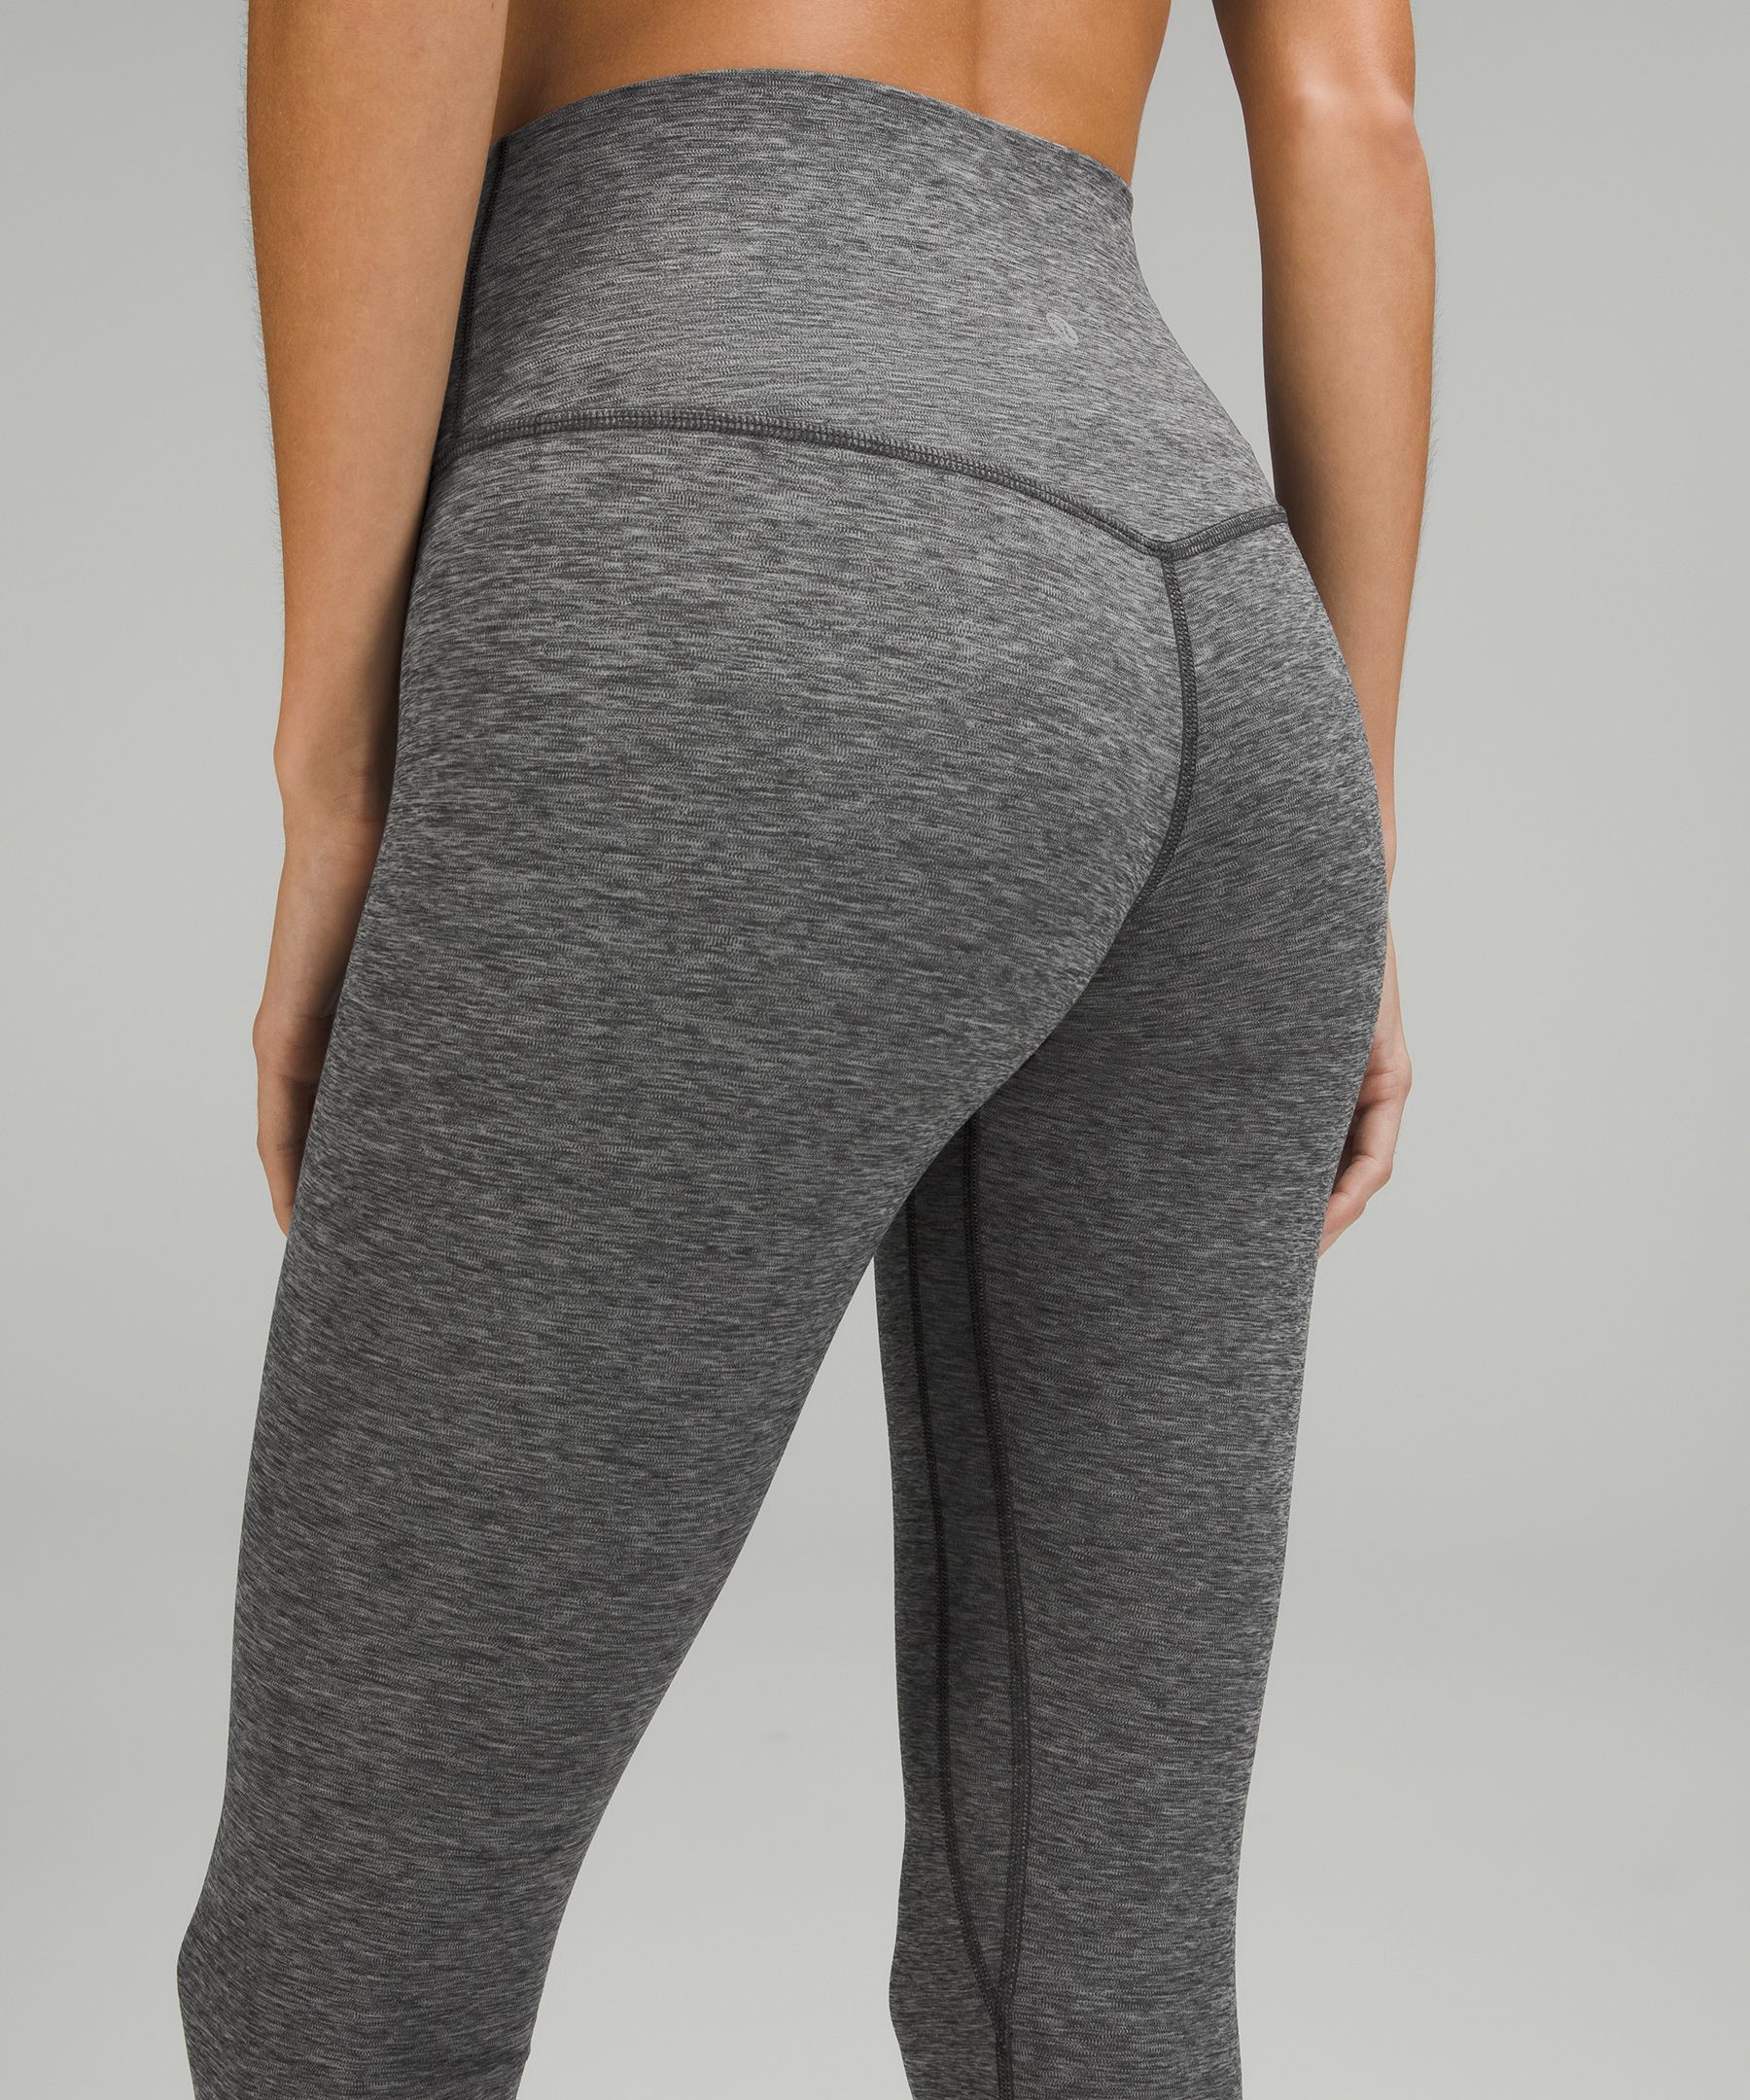 Lululemon Mapped Out HR-Hi-Rise Tight 28” (US6 - UK10 ) RRP £118